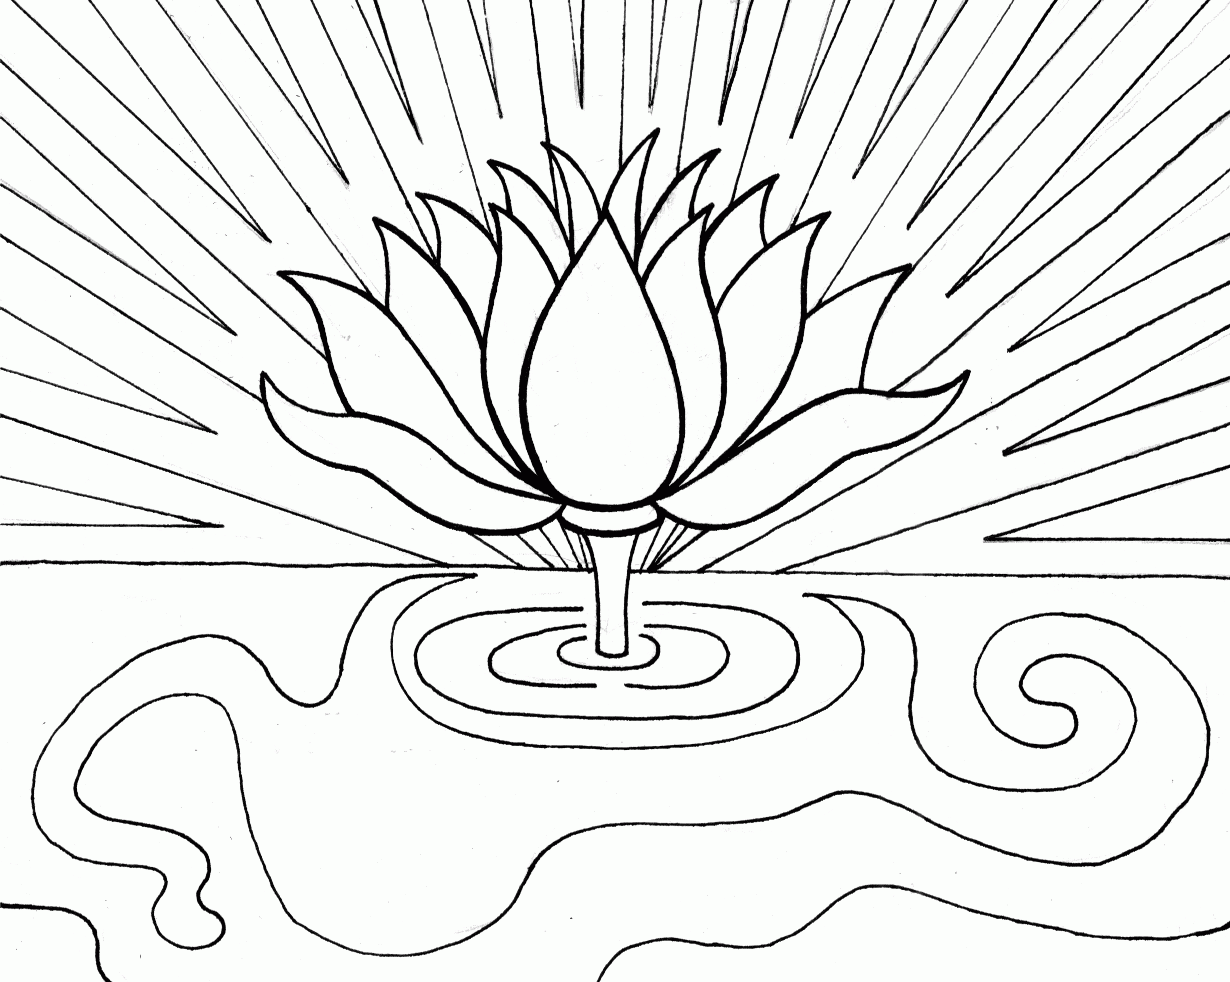 Free Lotus Flower Coloring Pages Download Free Lotus Flower Coloring 